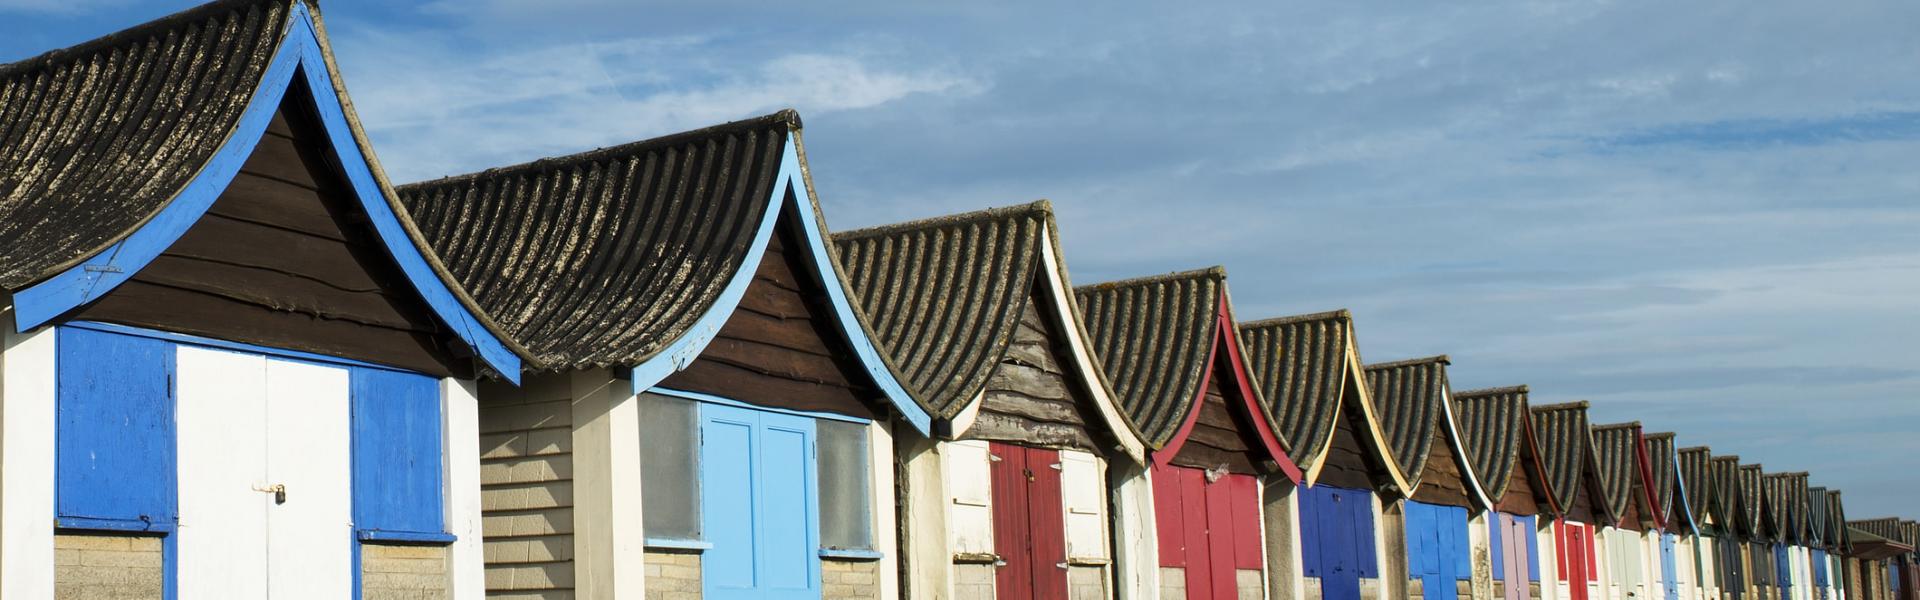 Holiday lettings & accommodation in Mablethorpe - HomeToGo